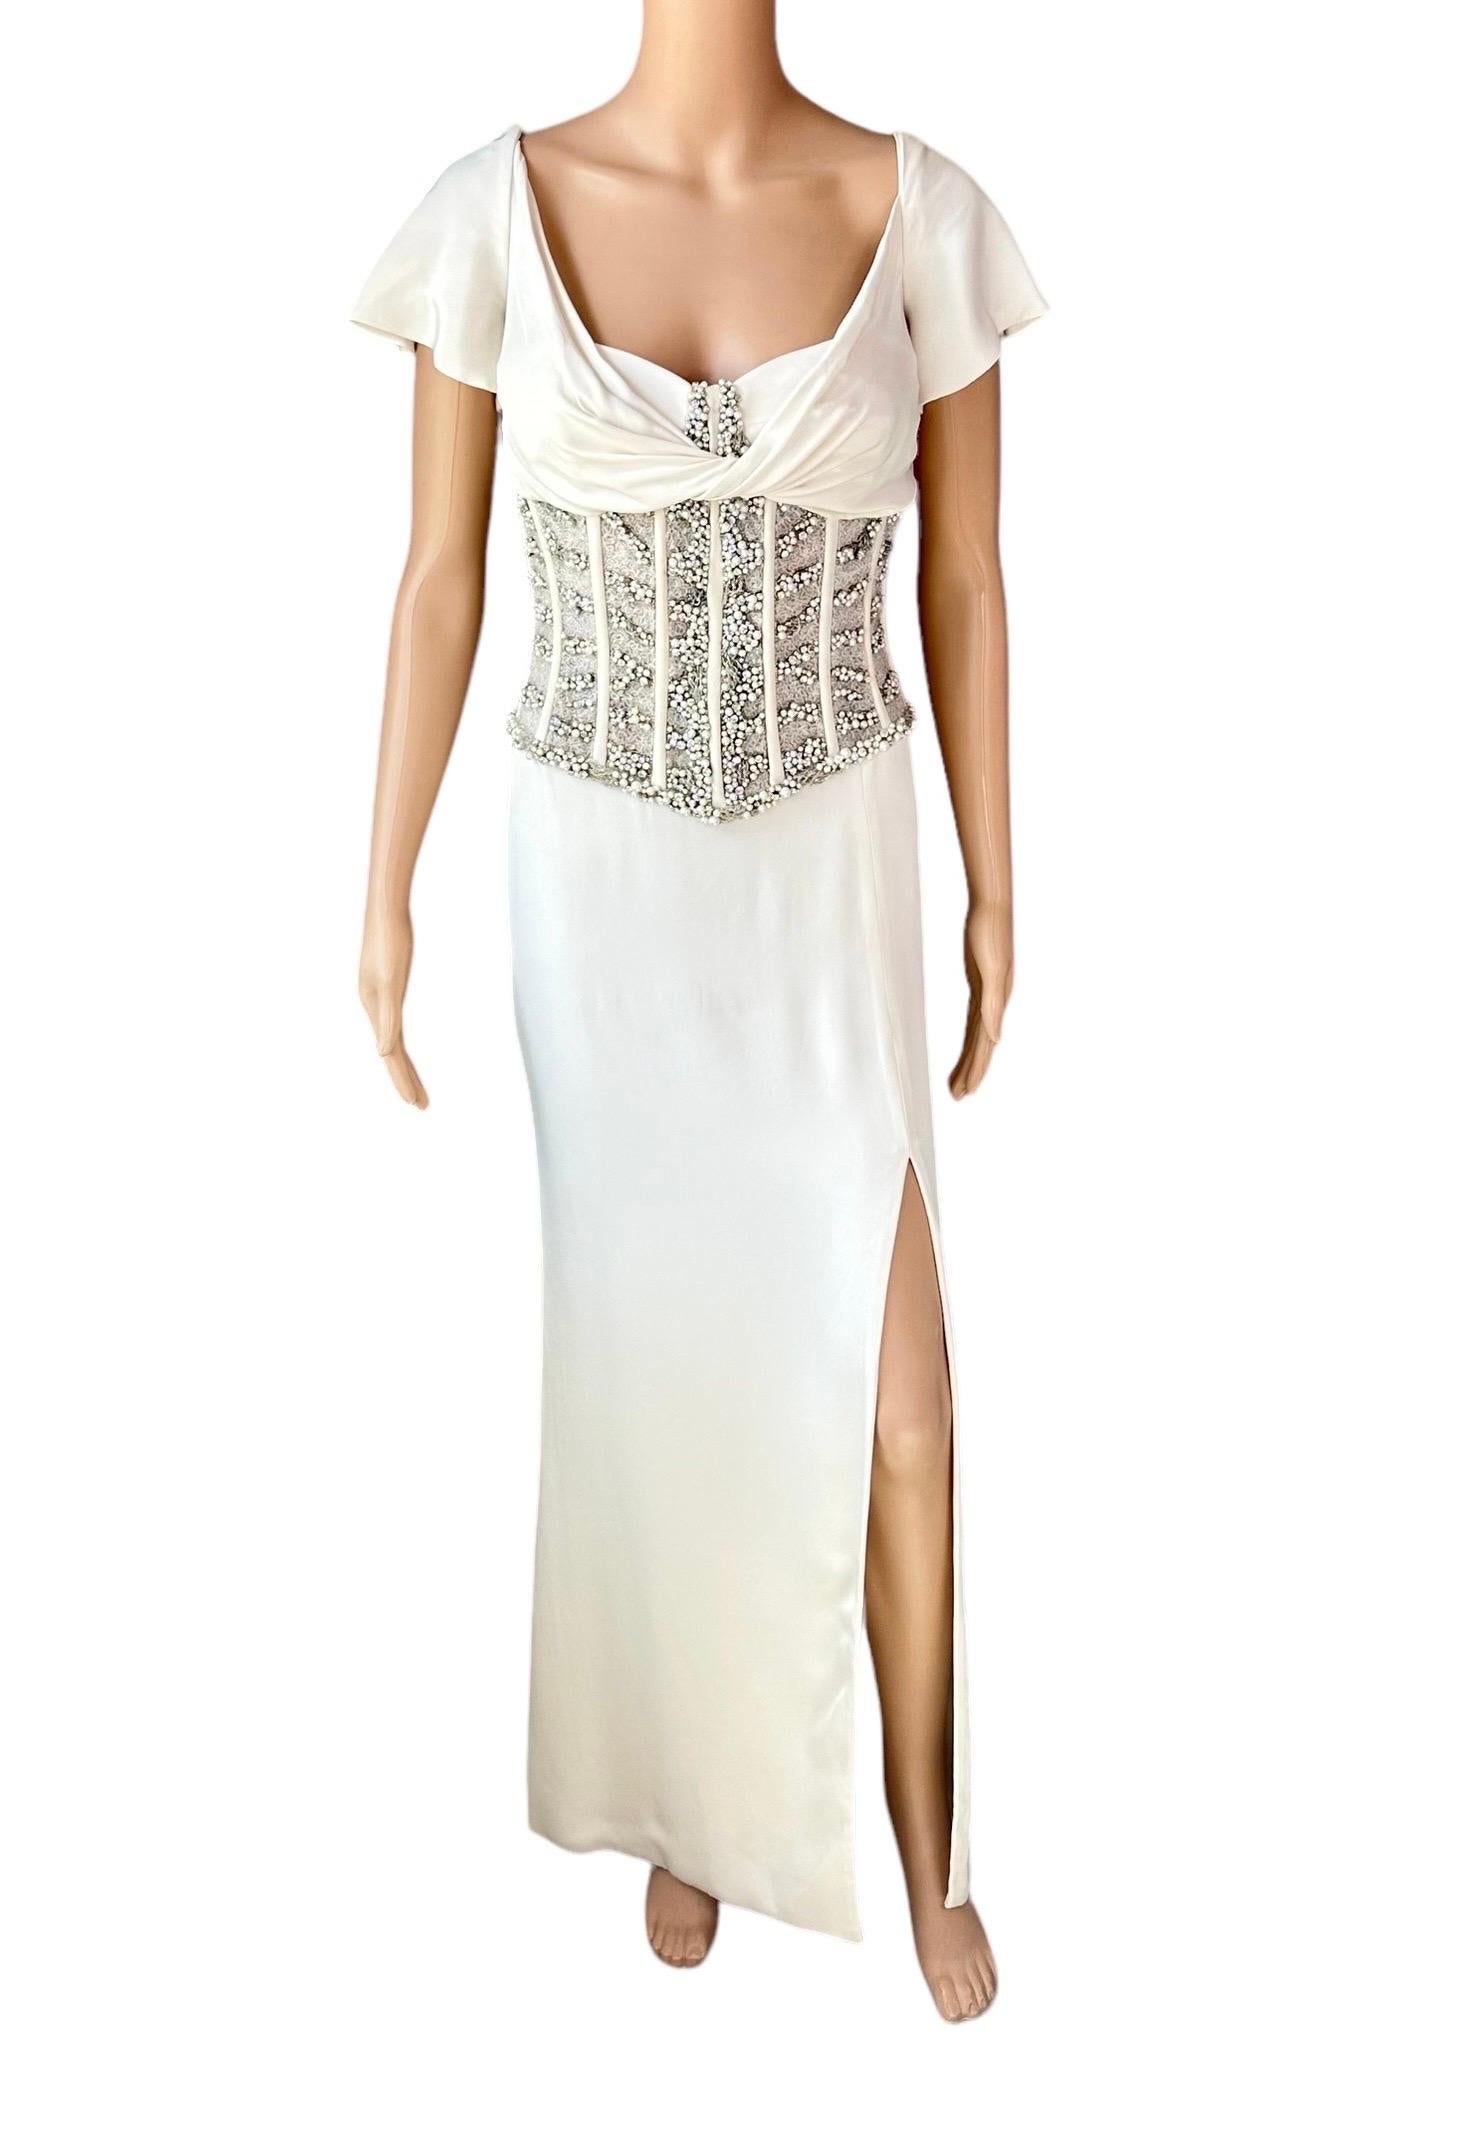 Women's Roberto Cavalli Embellished Corset Empire Silhouette Evening Dress Gown For Sale